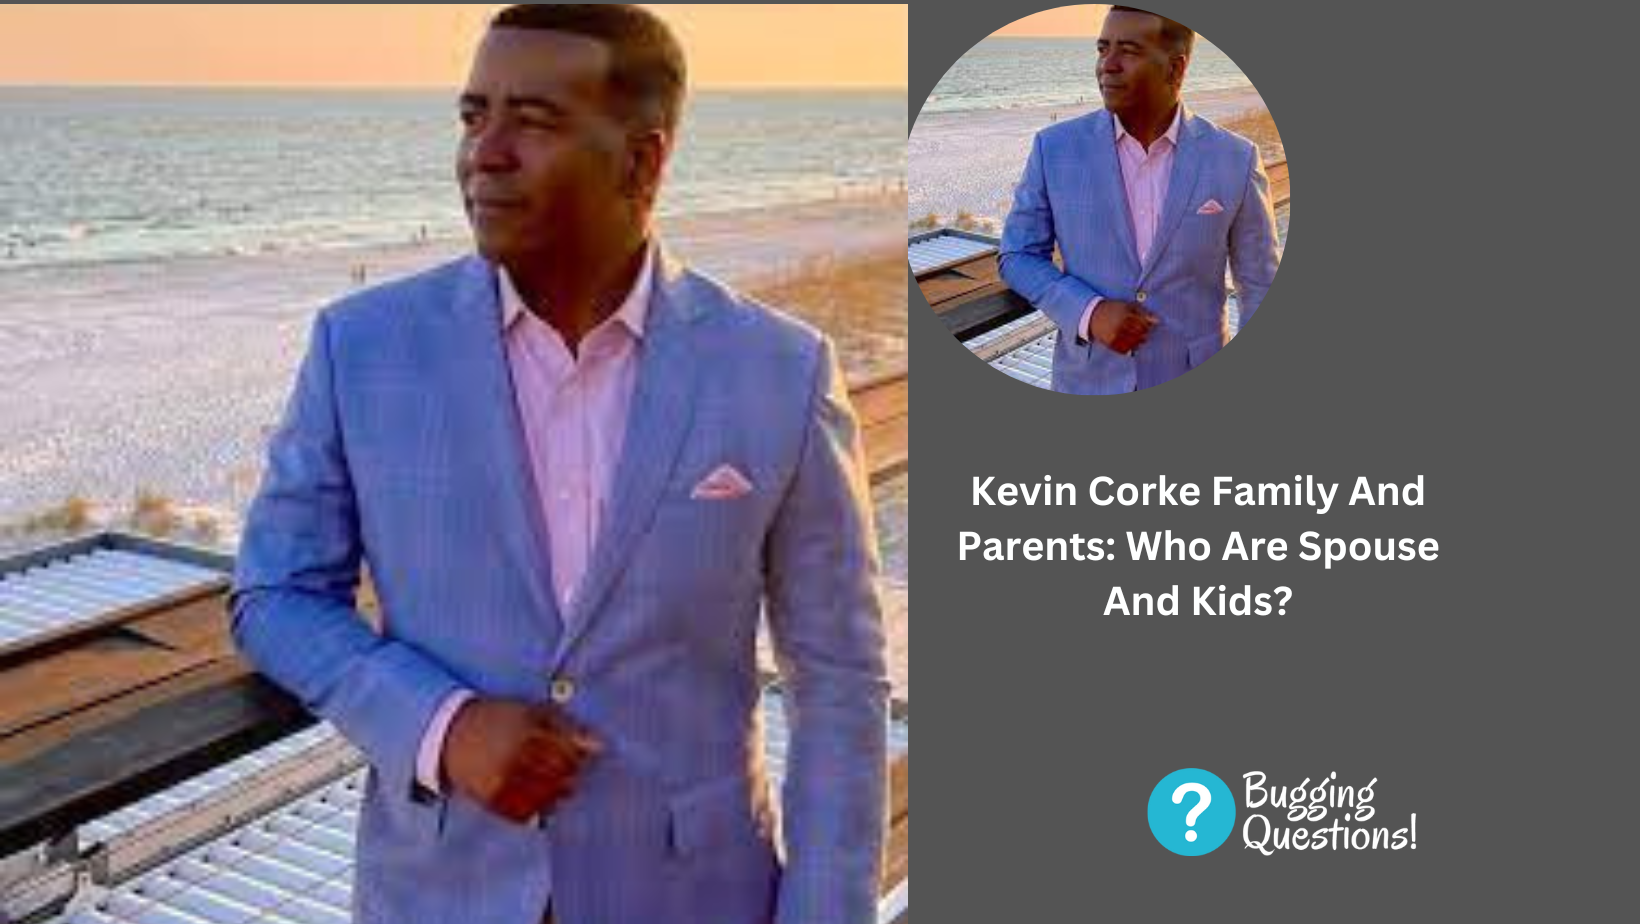 Kevin Corke Family And Parents Who Are Spouse And Kids? Here Is What